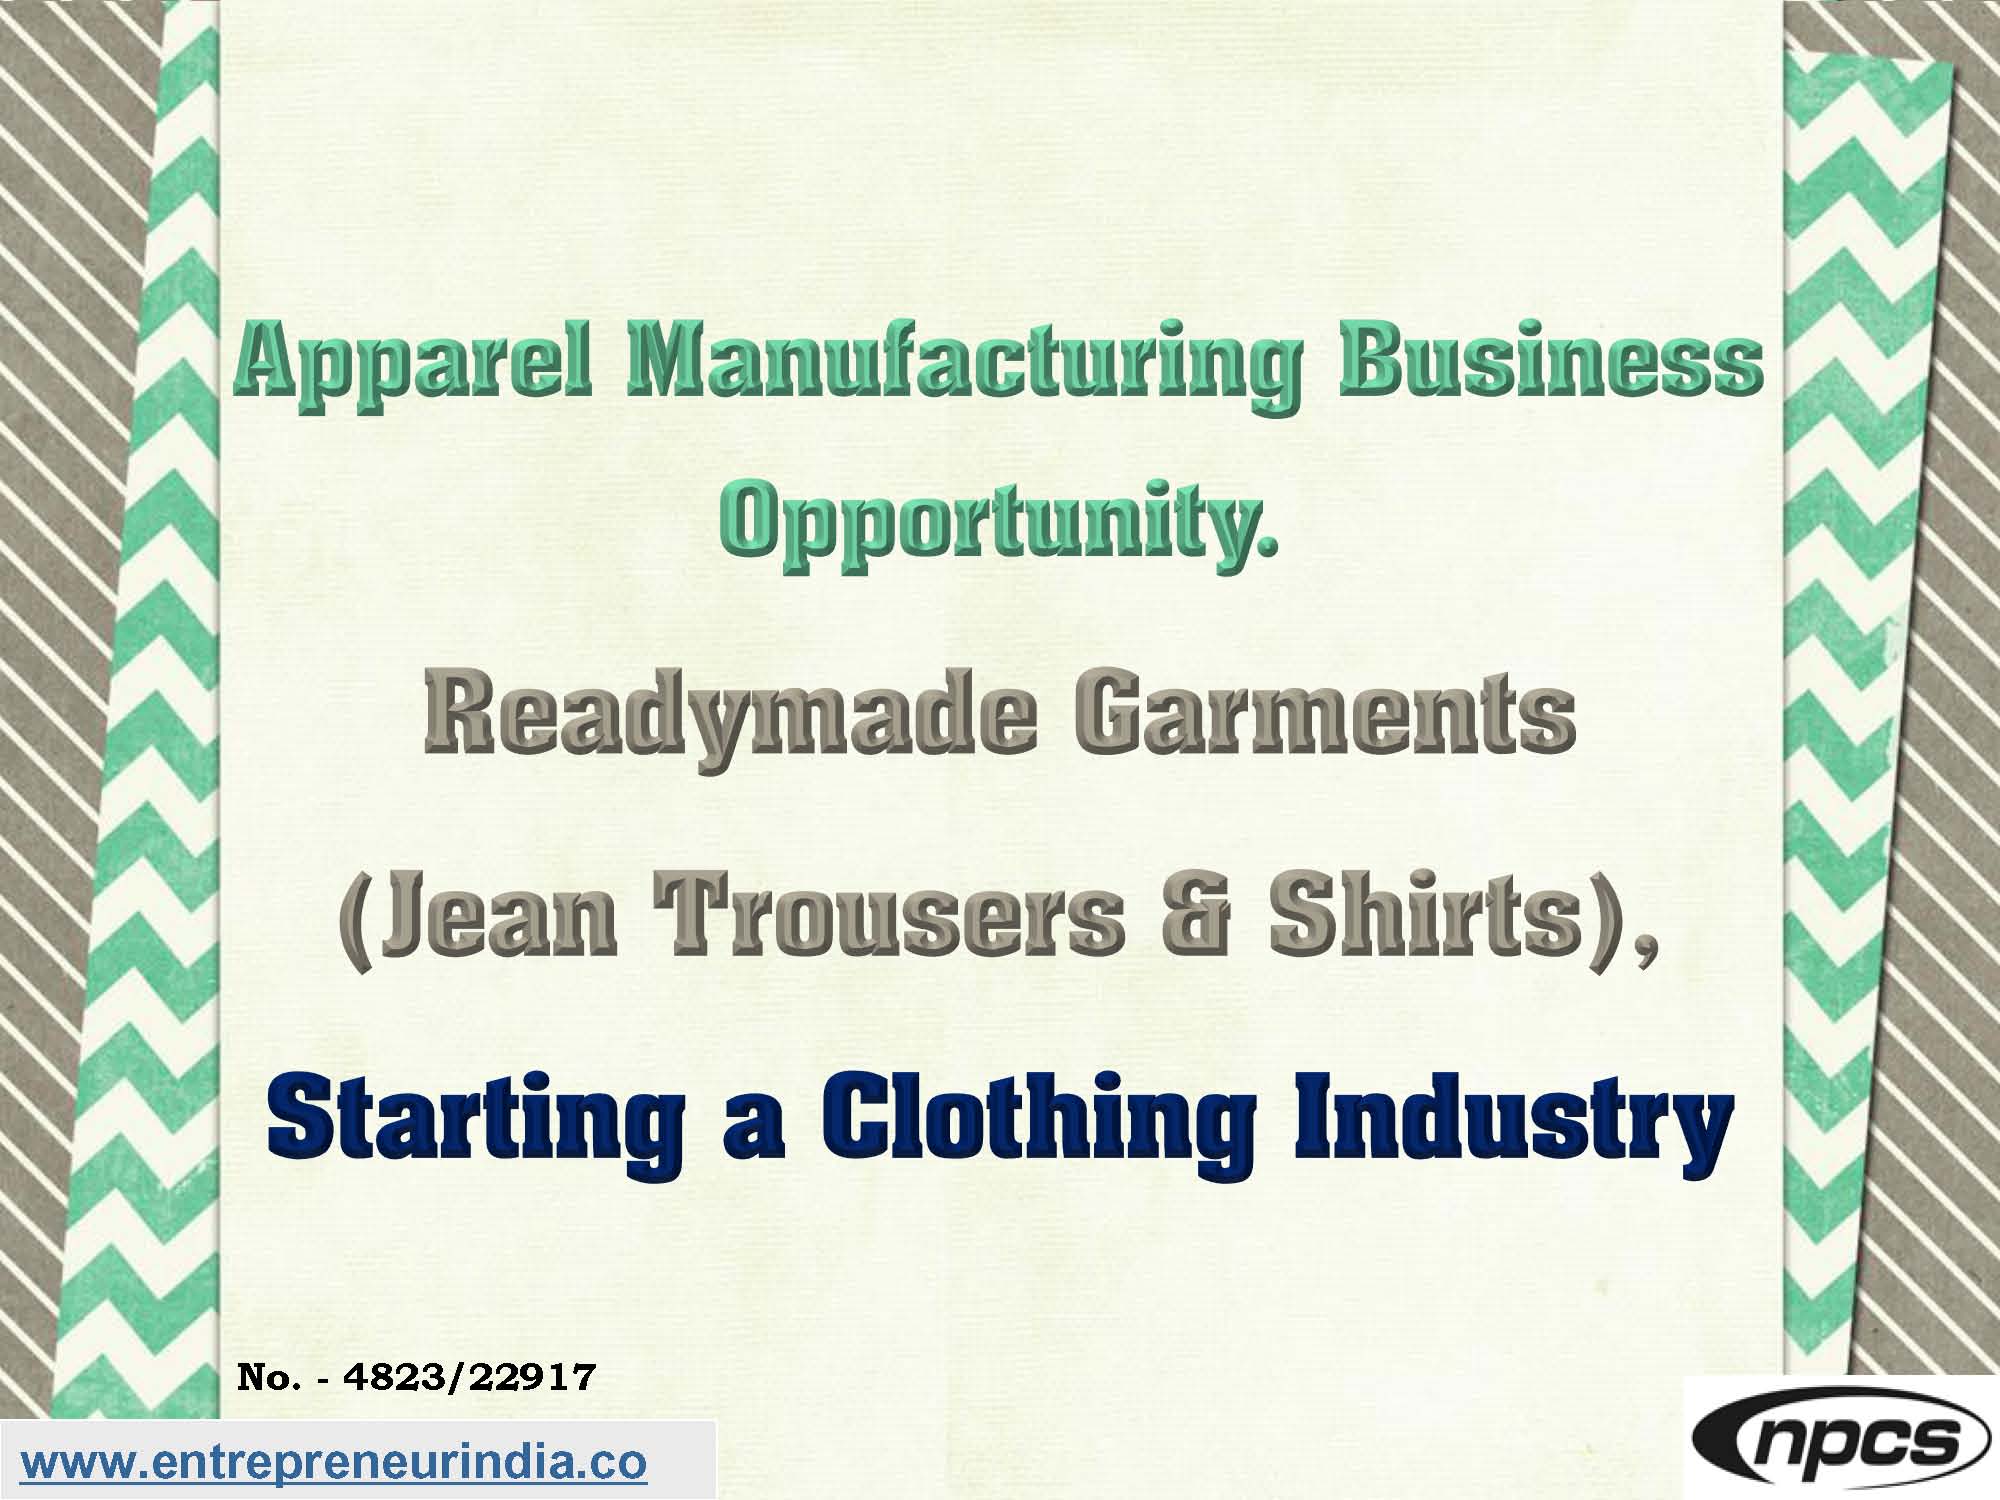 Apparel Manufacturing Business Opportunity.jpg